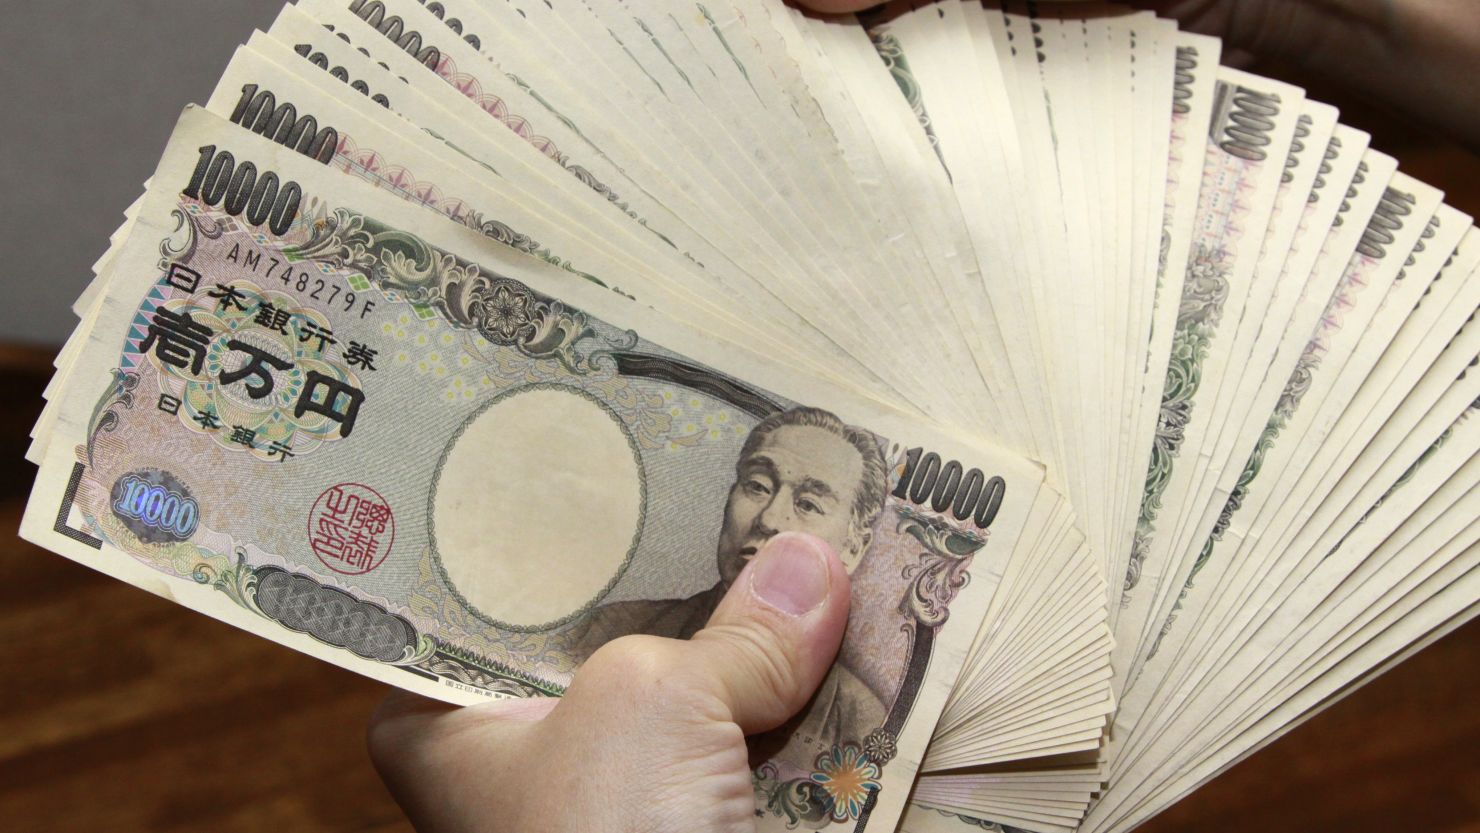 Japan's yen has weakened by 15% against the U.S. dollar since November following Tokyo's monetary policy expansion 